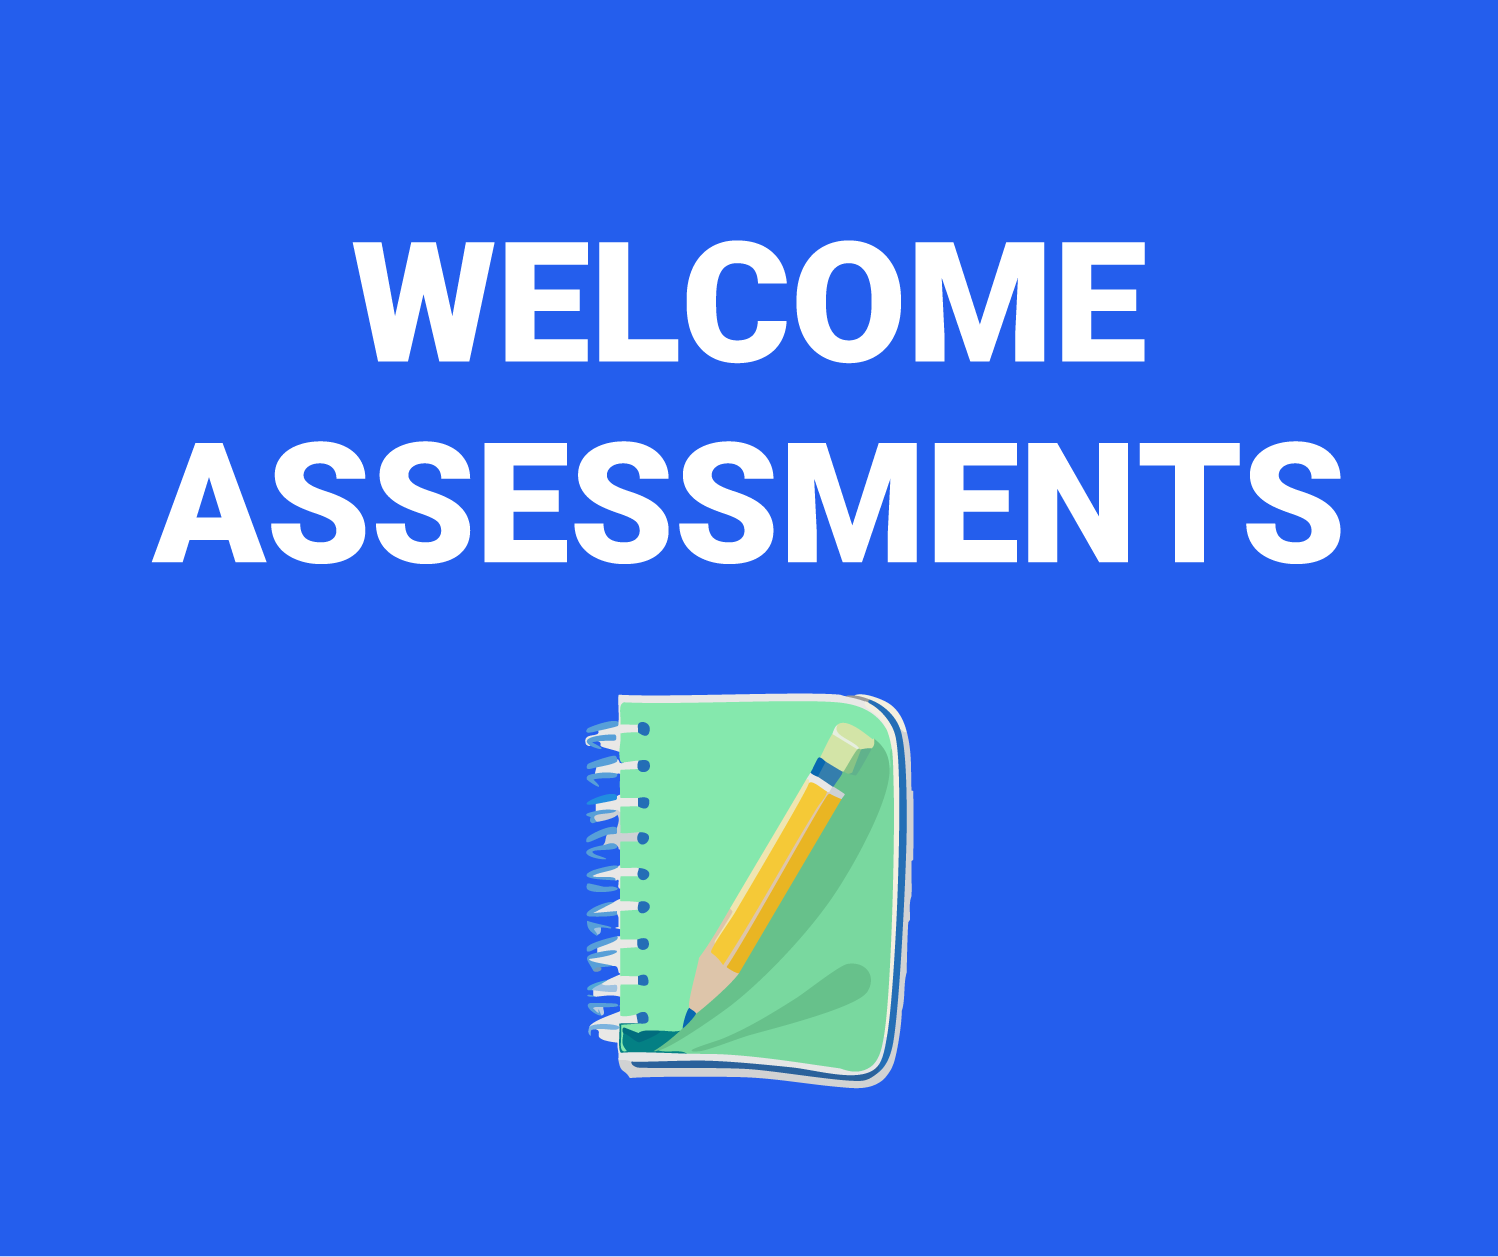 Technician Welcome Assessments